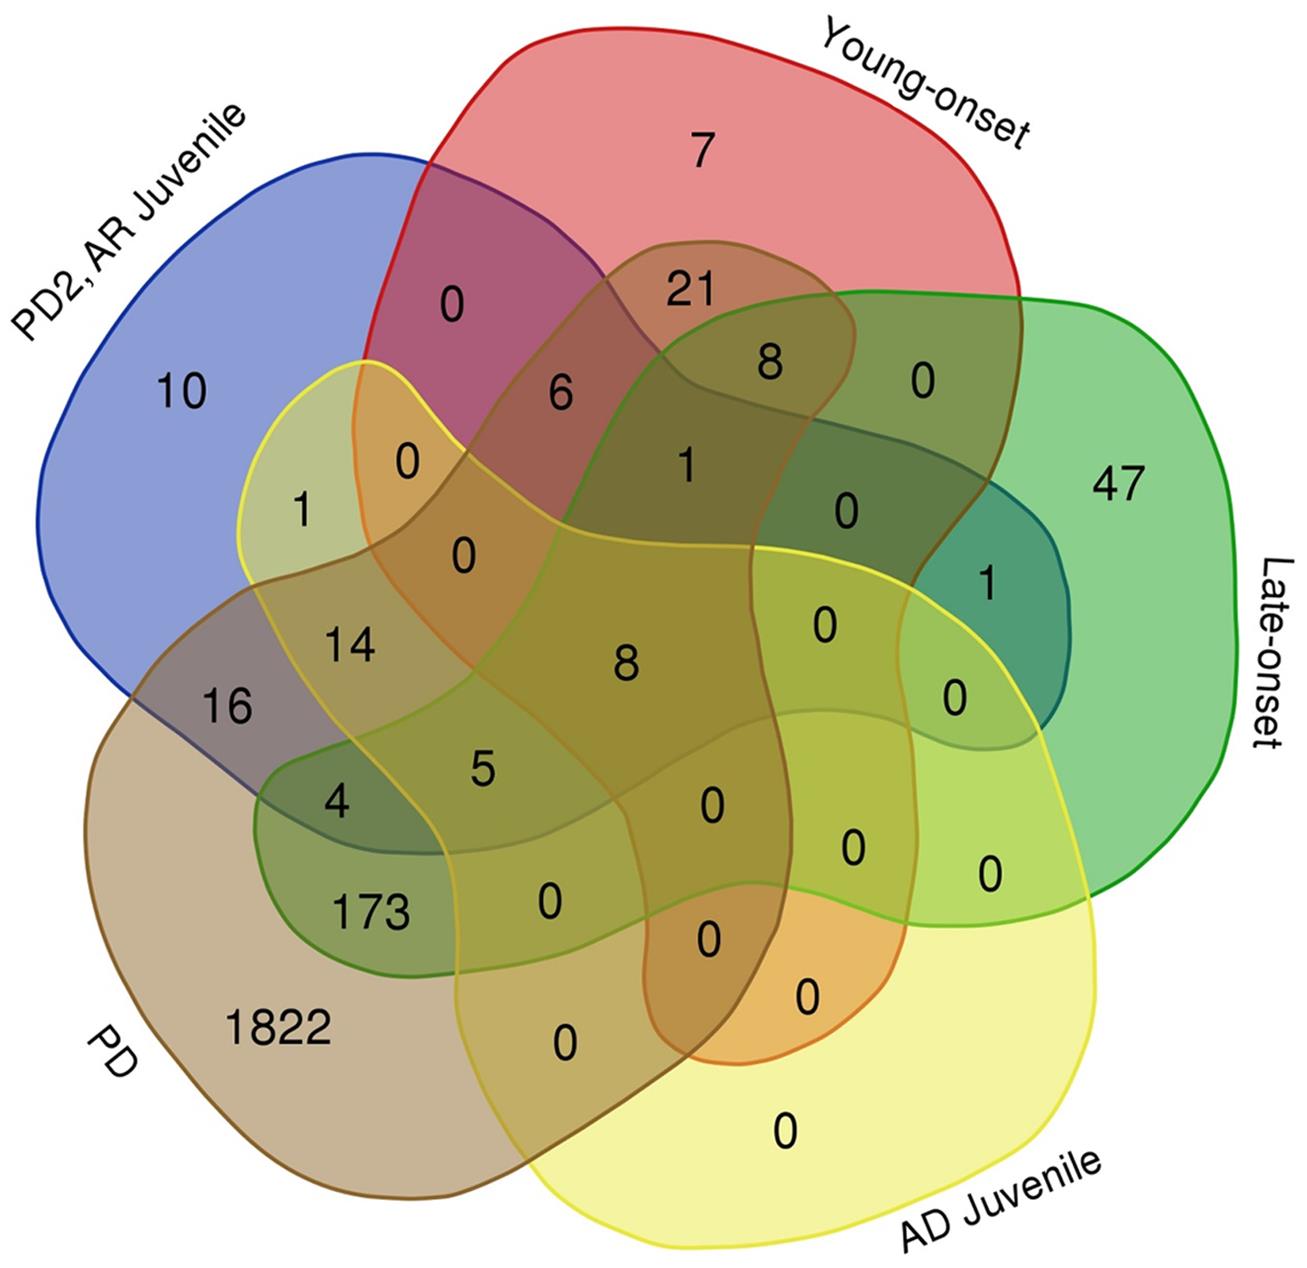 Venn diagram of the genes related to PD, AD juveniles, PD2 and AR juveniles, and late-onset and young-onset PD.